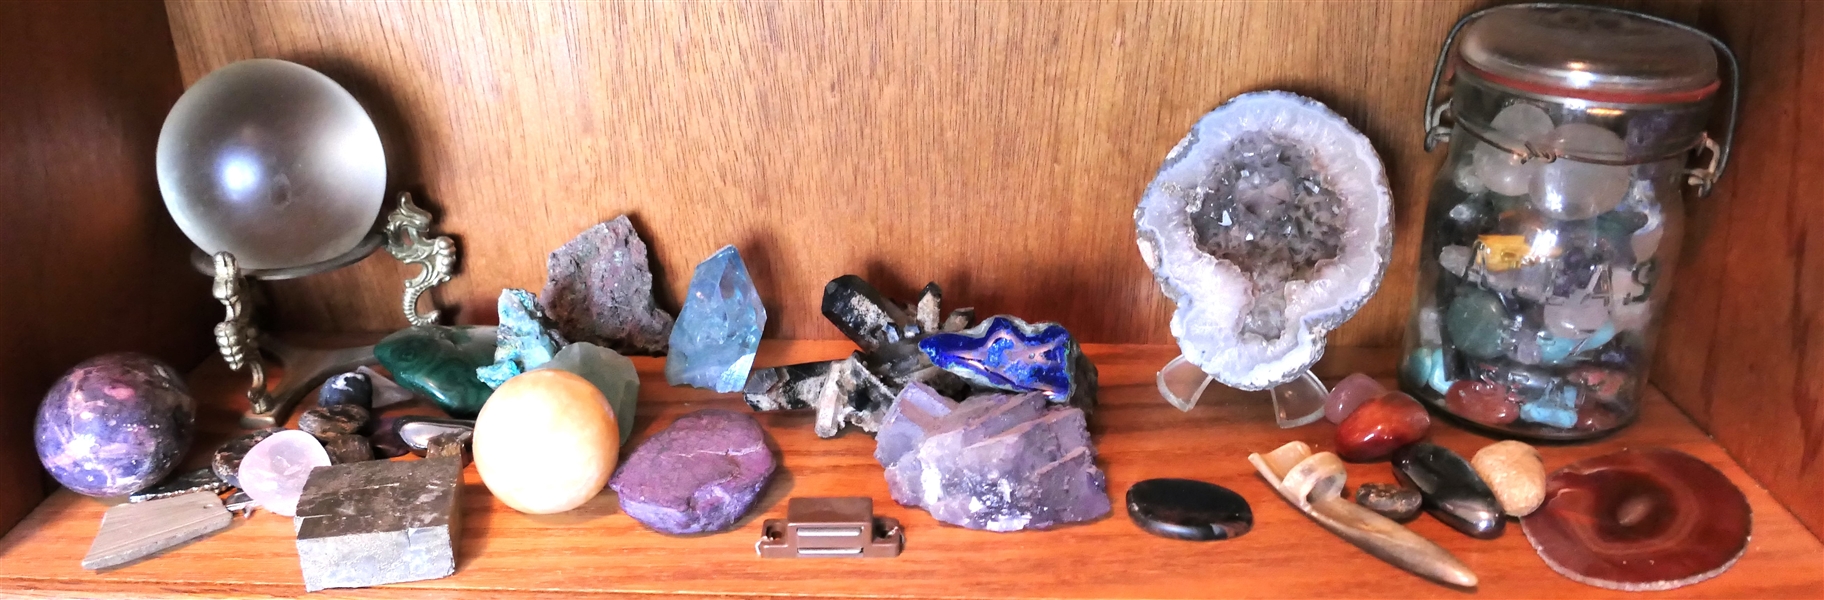 Lot of Stone and Geodes including stone Eggs, Crystal Ball on Stand, Jar of Stones, and Horn Carved Piece